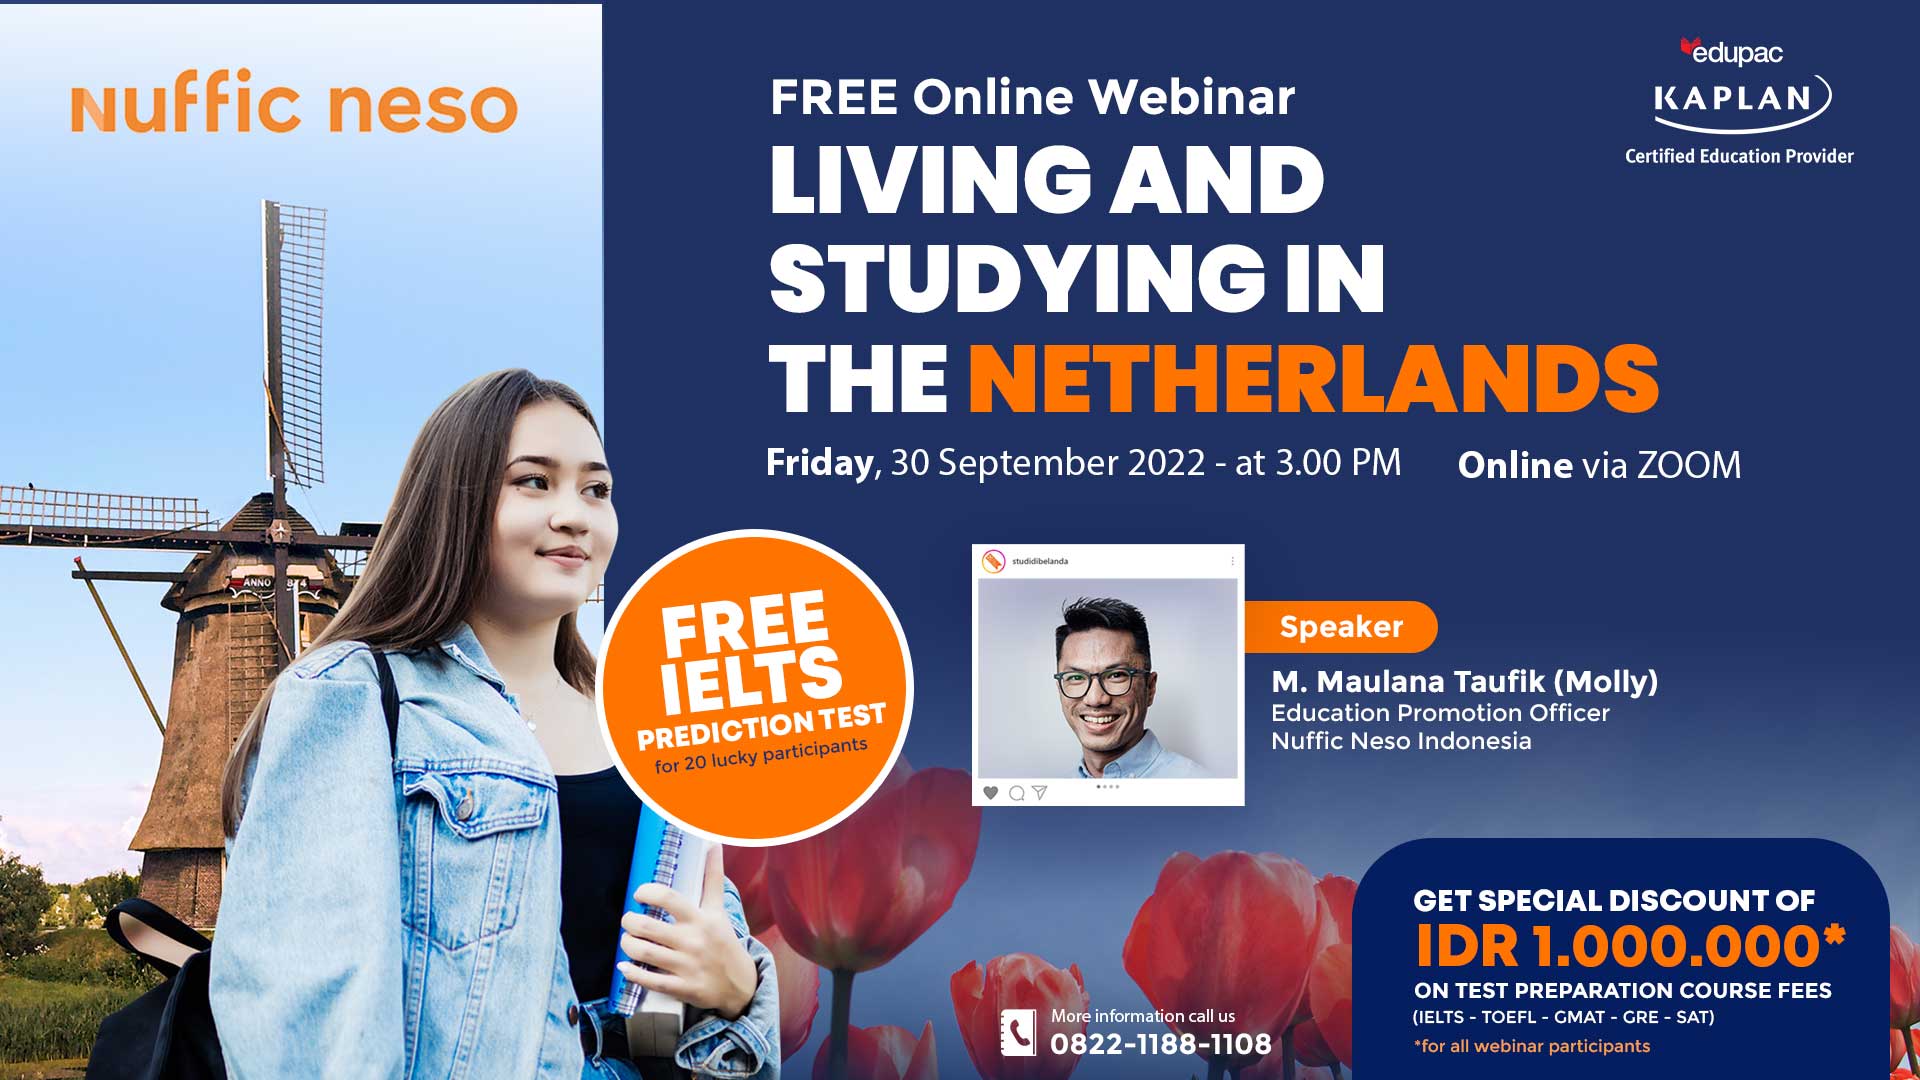 FREE Online Webinar "Living and Studying in the Netherlands" 